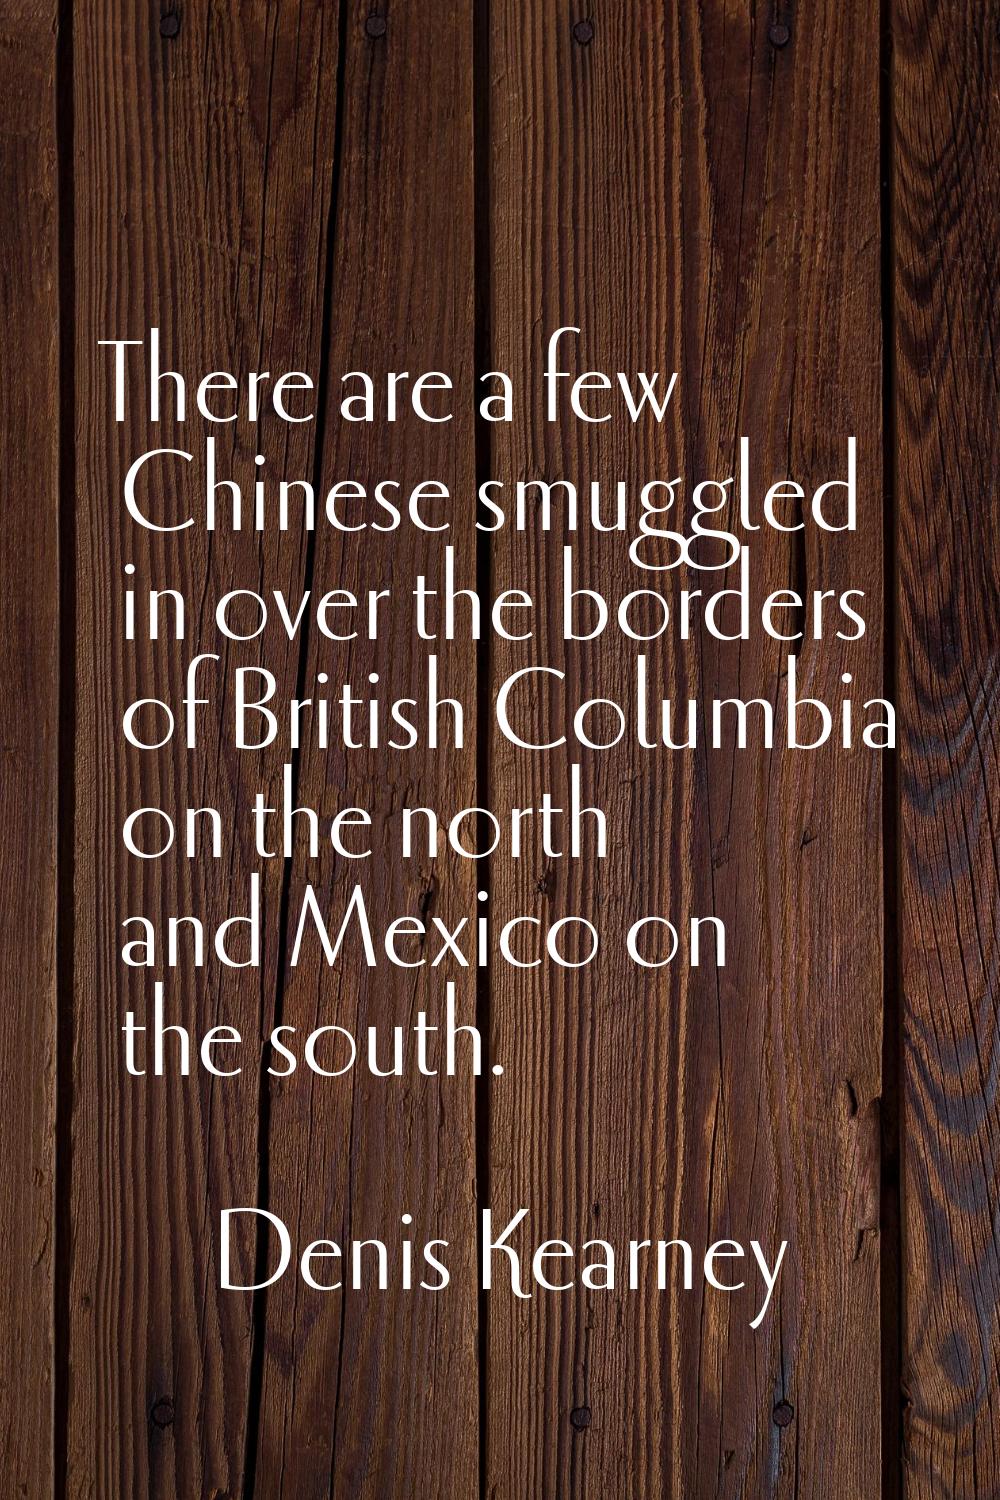 There are a few Chinese smuggled in over the borders of British Columbia on the north and Mexico on